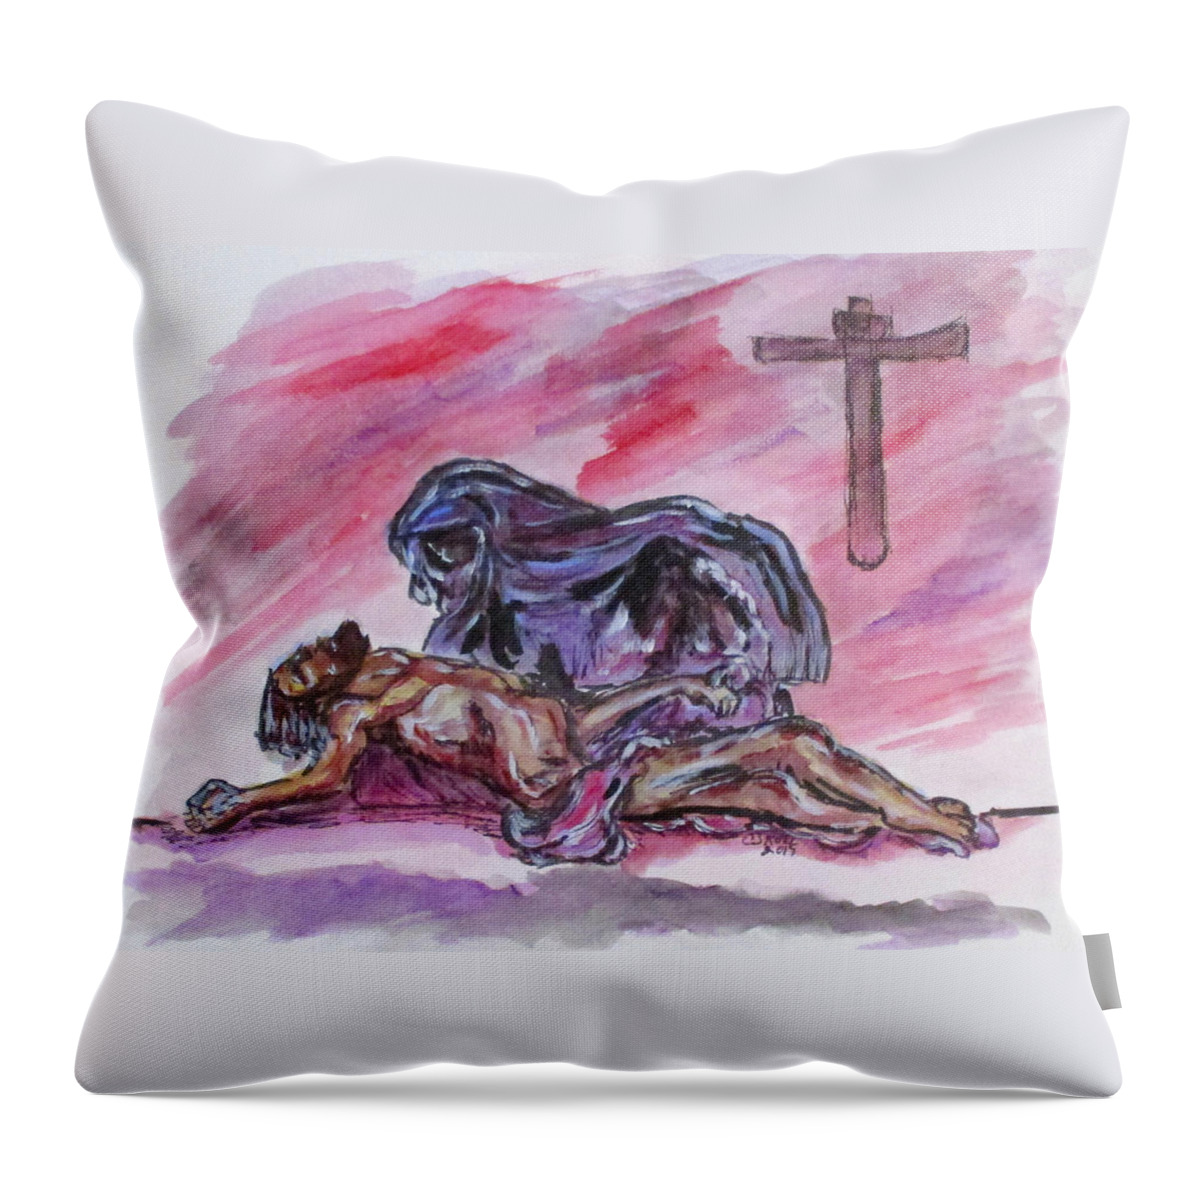 Jesus Throw Pillow featuring the painting It Is Done by Clyde J Kell